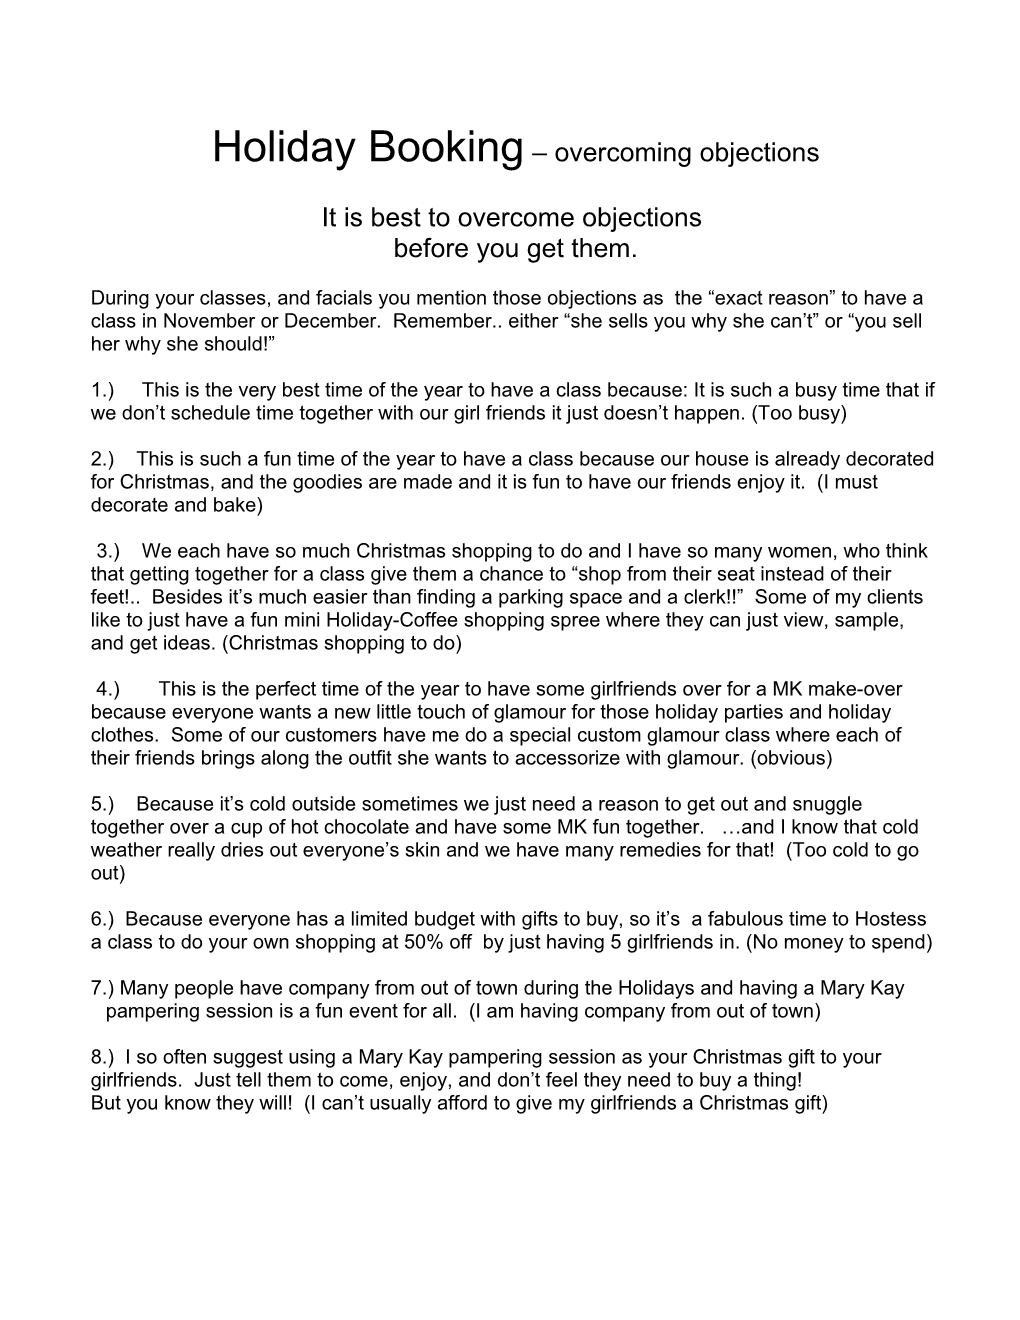 Holiday Booking Overcoming Objections